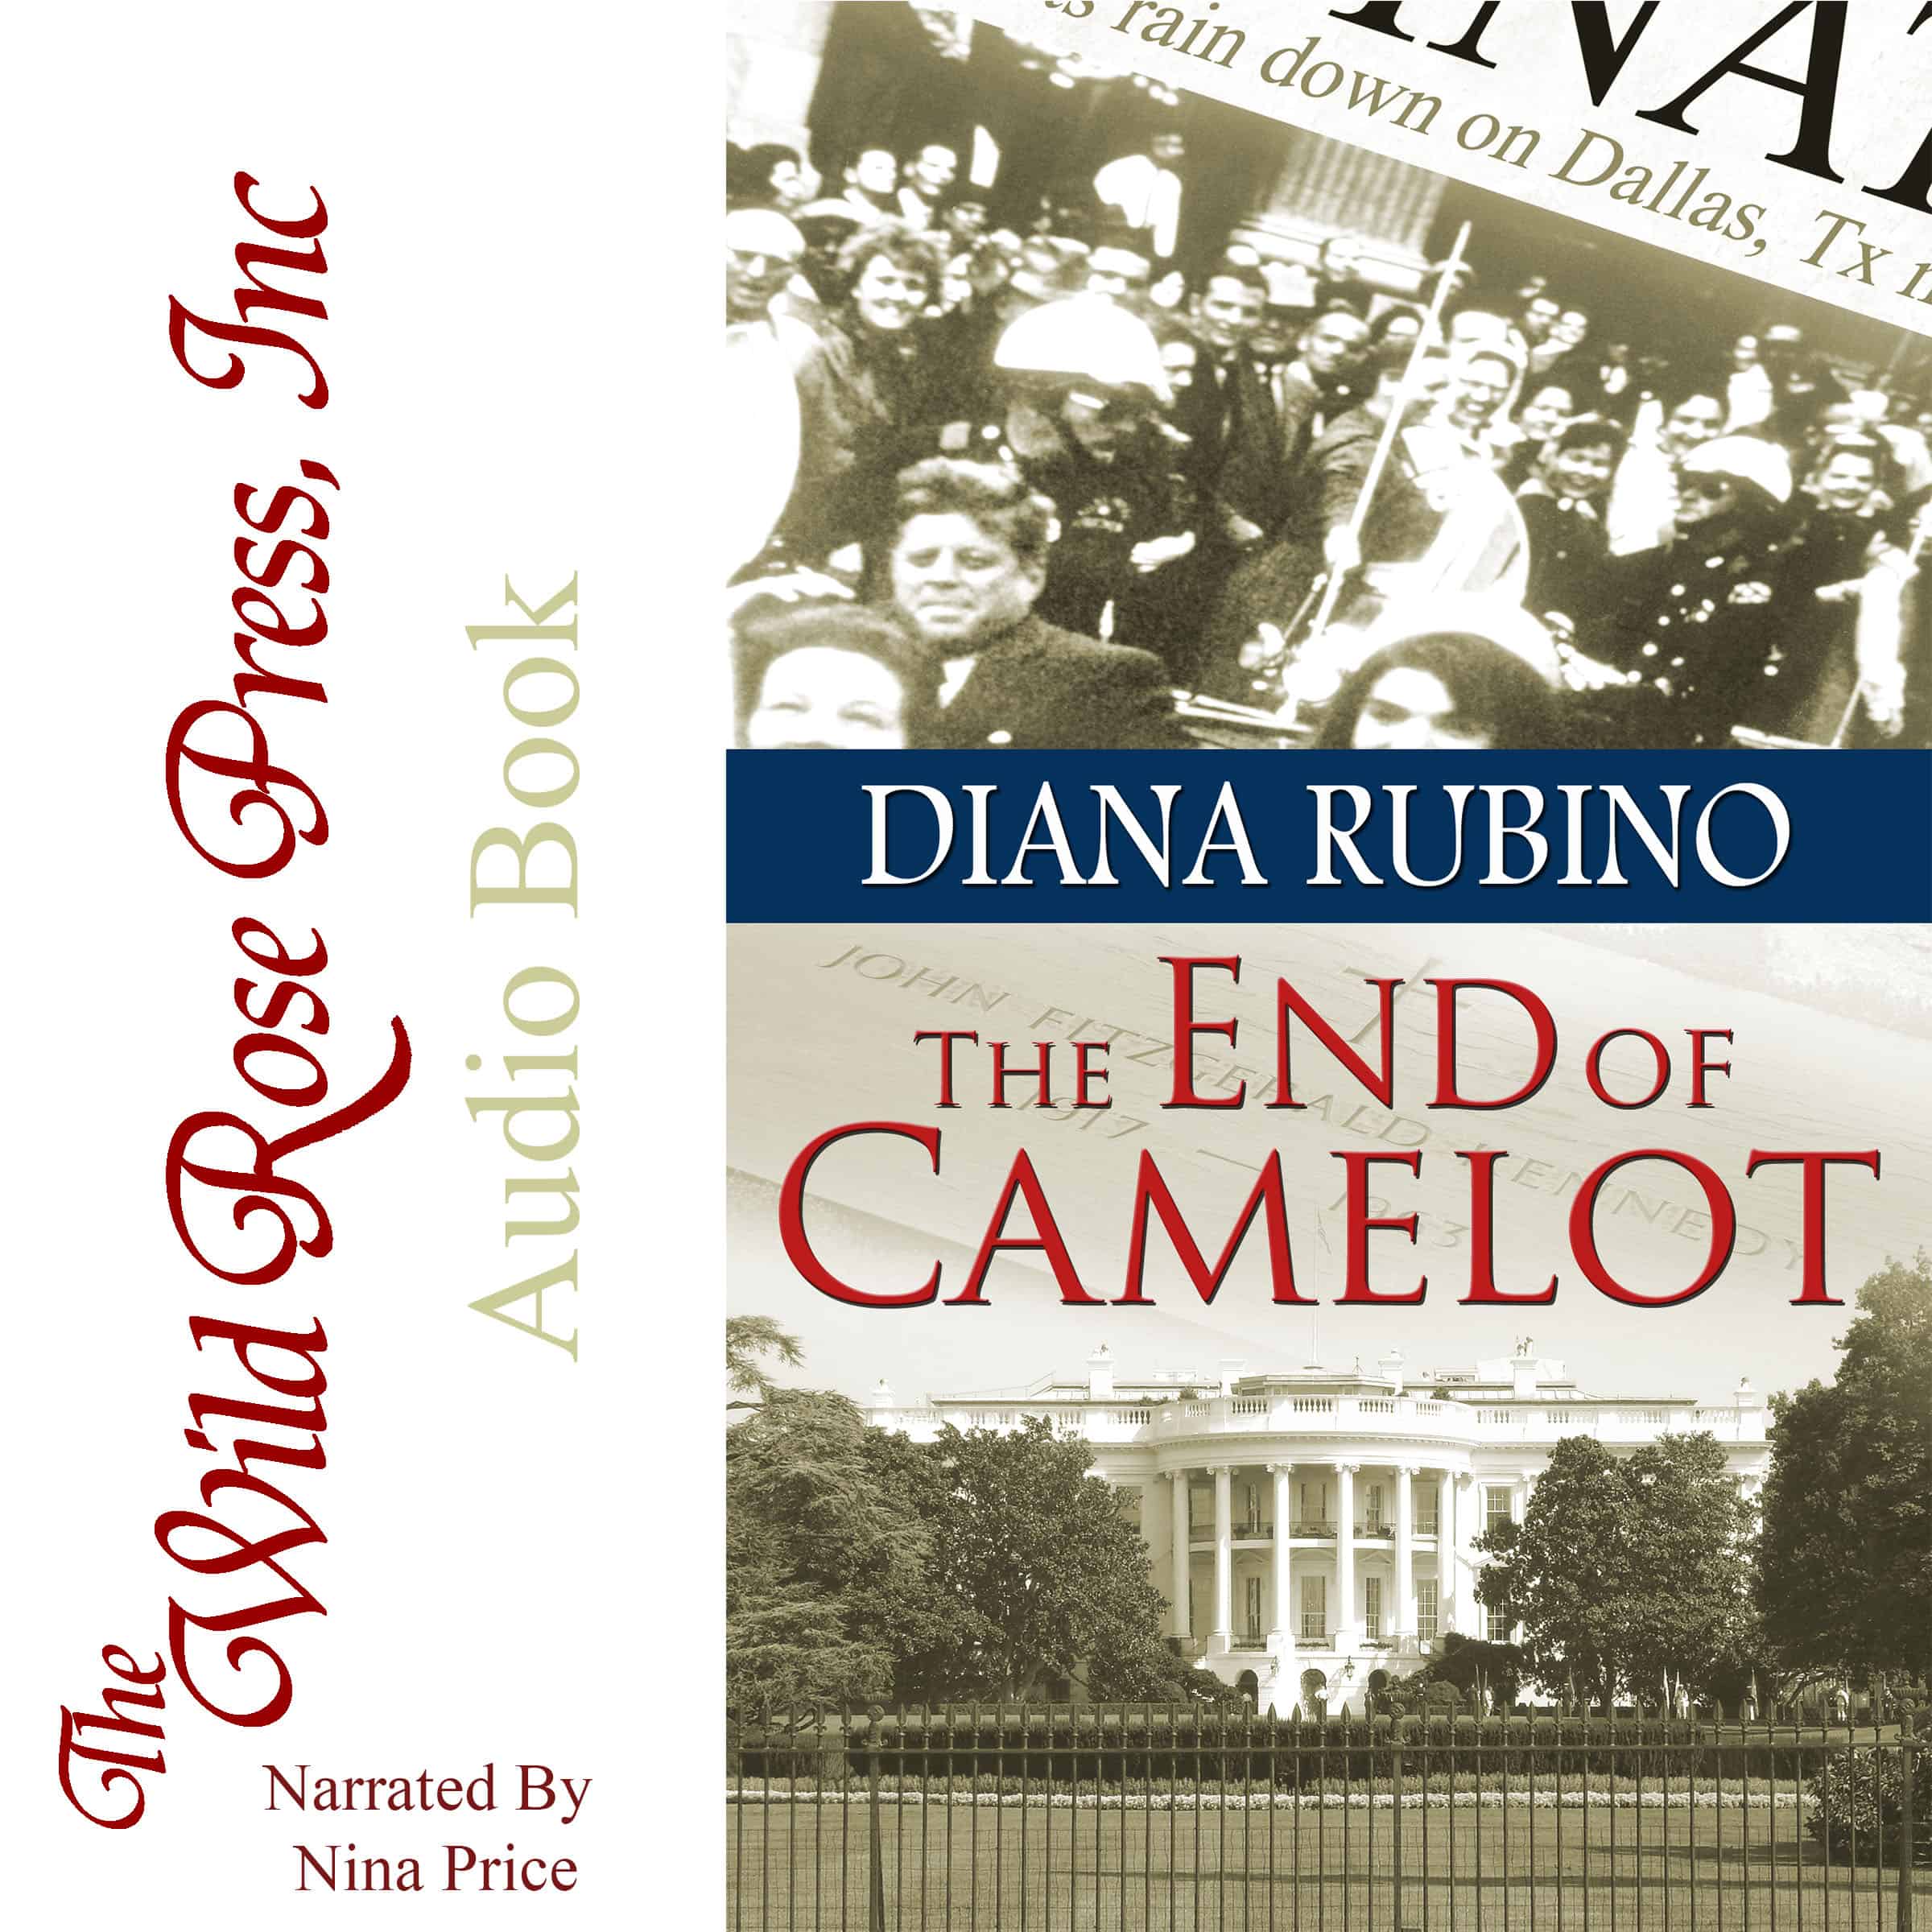 THE END OF CAMELOT